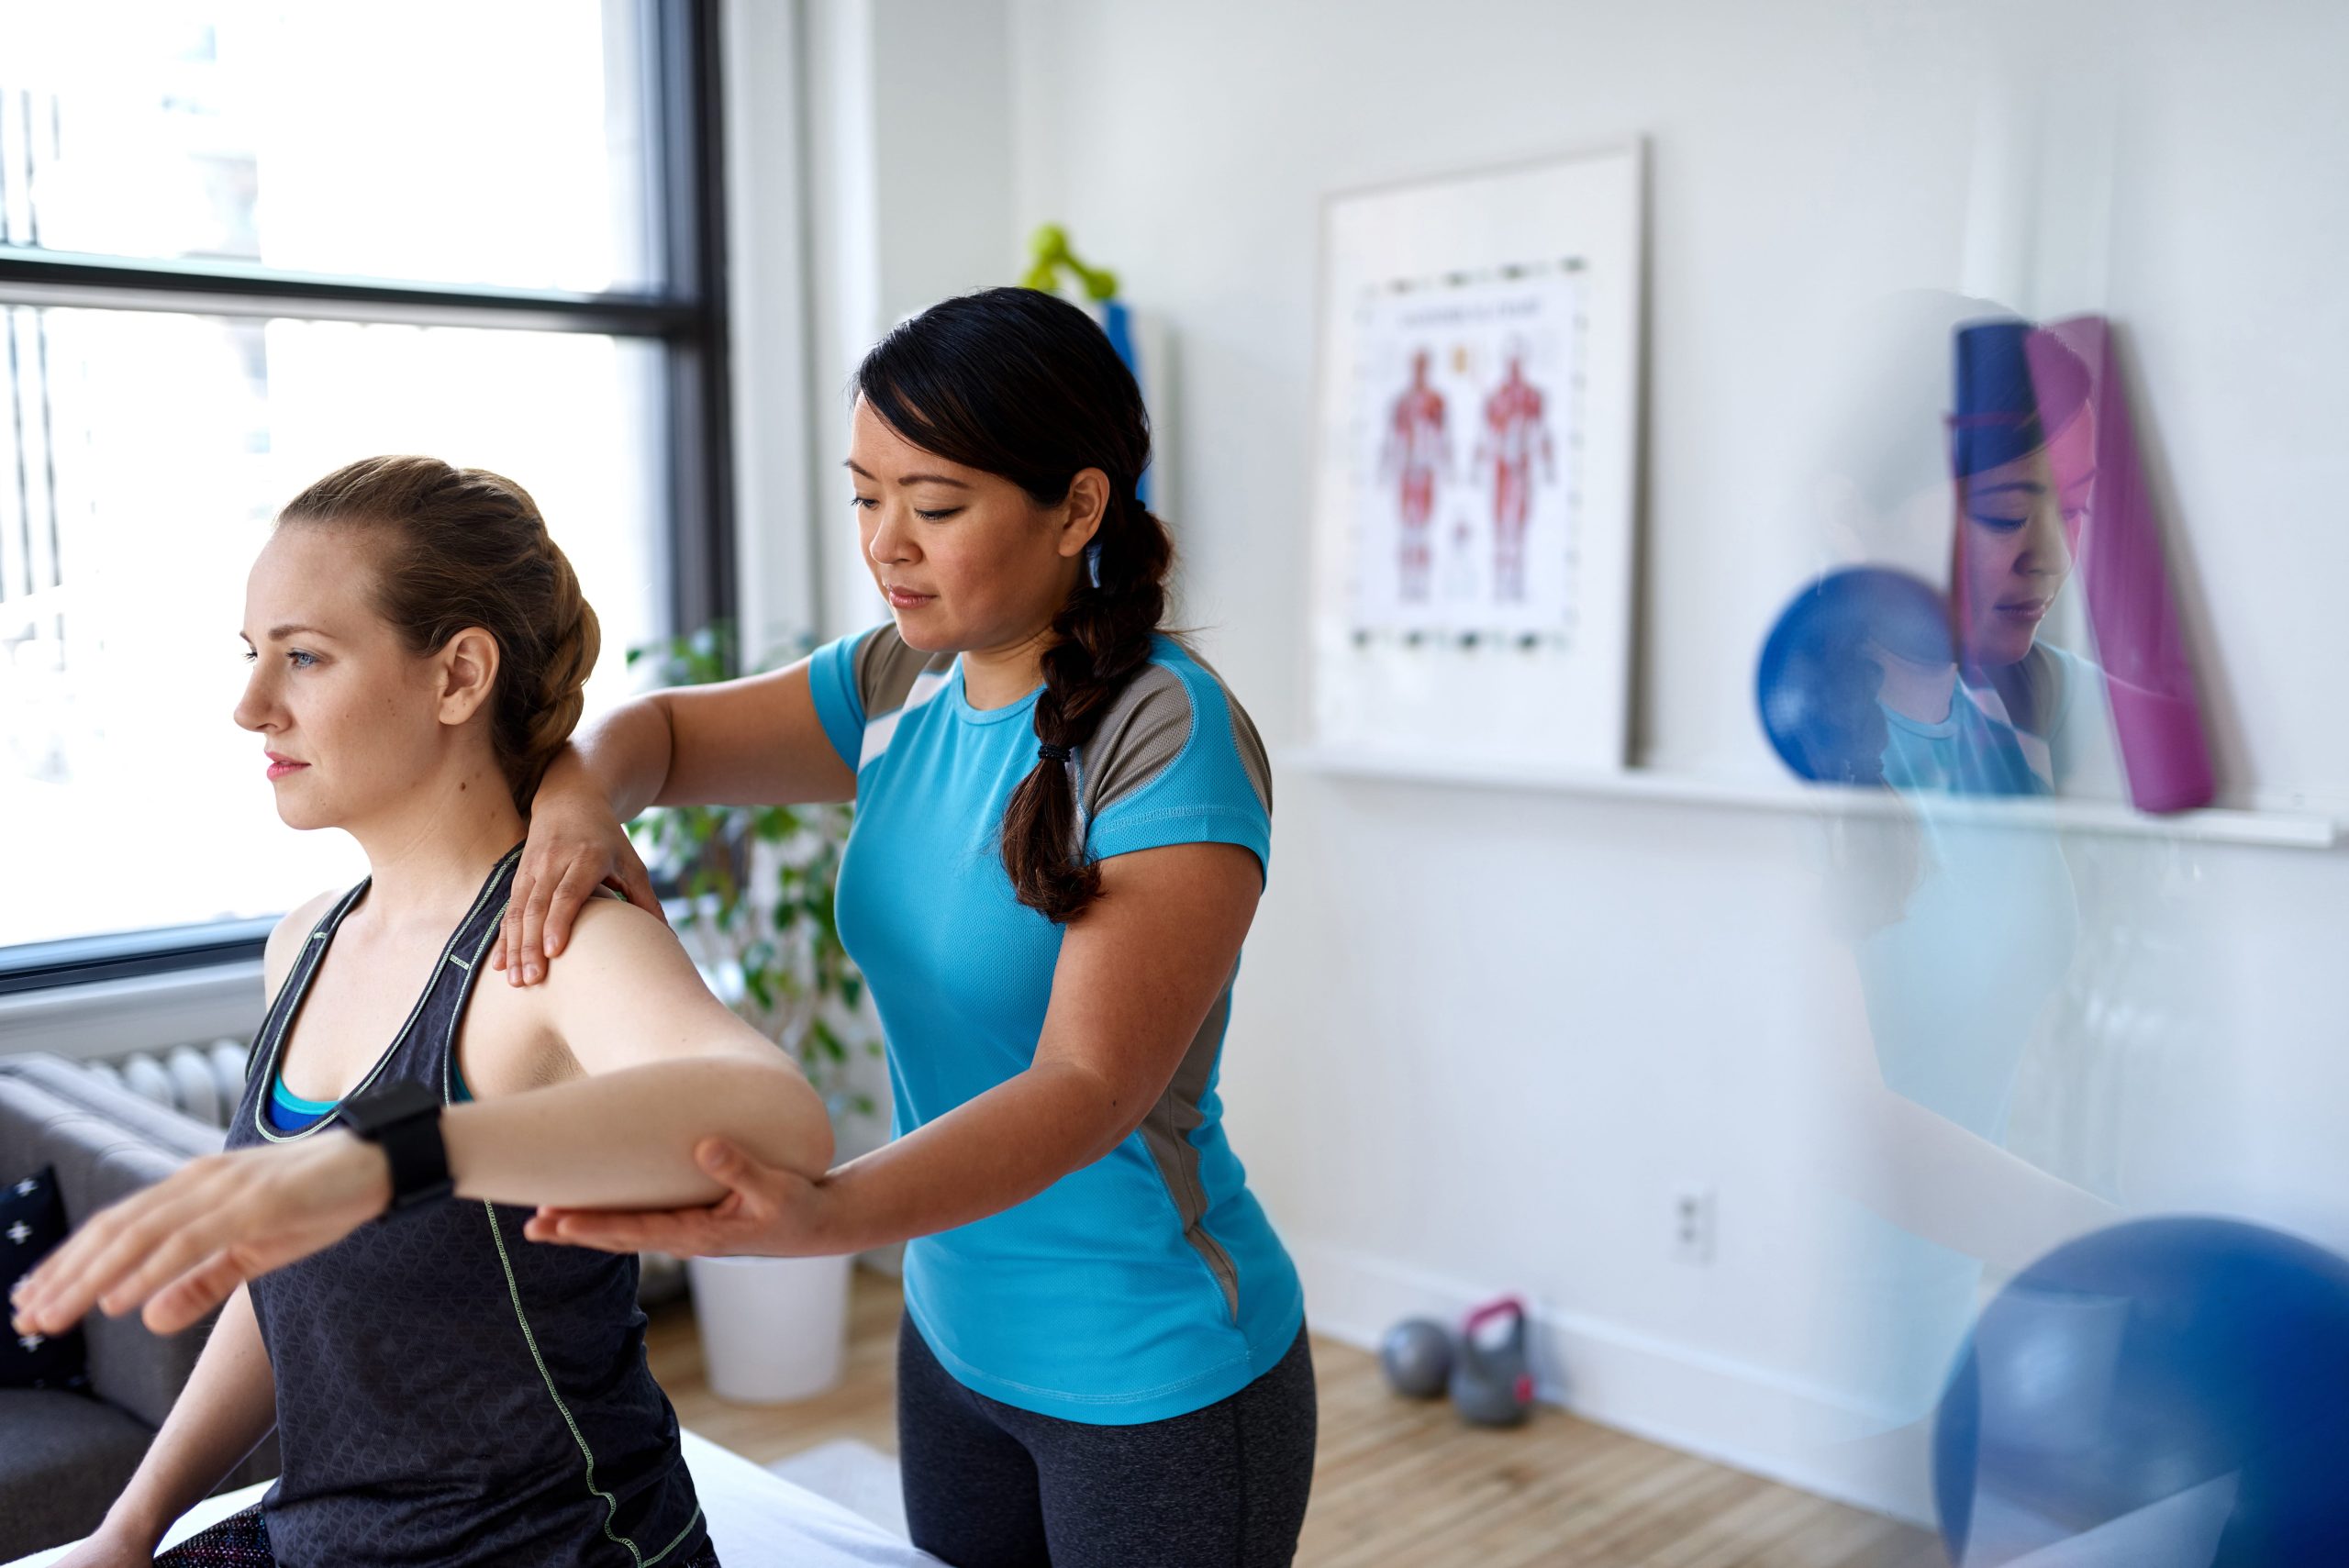 Who is physical therapy right for?